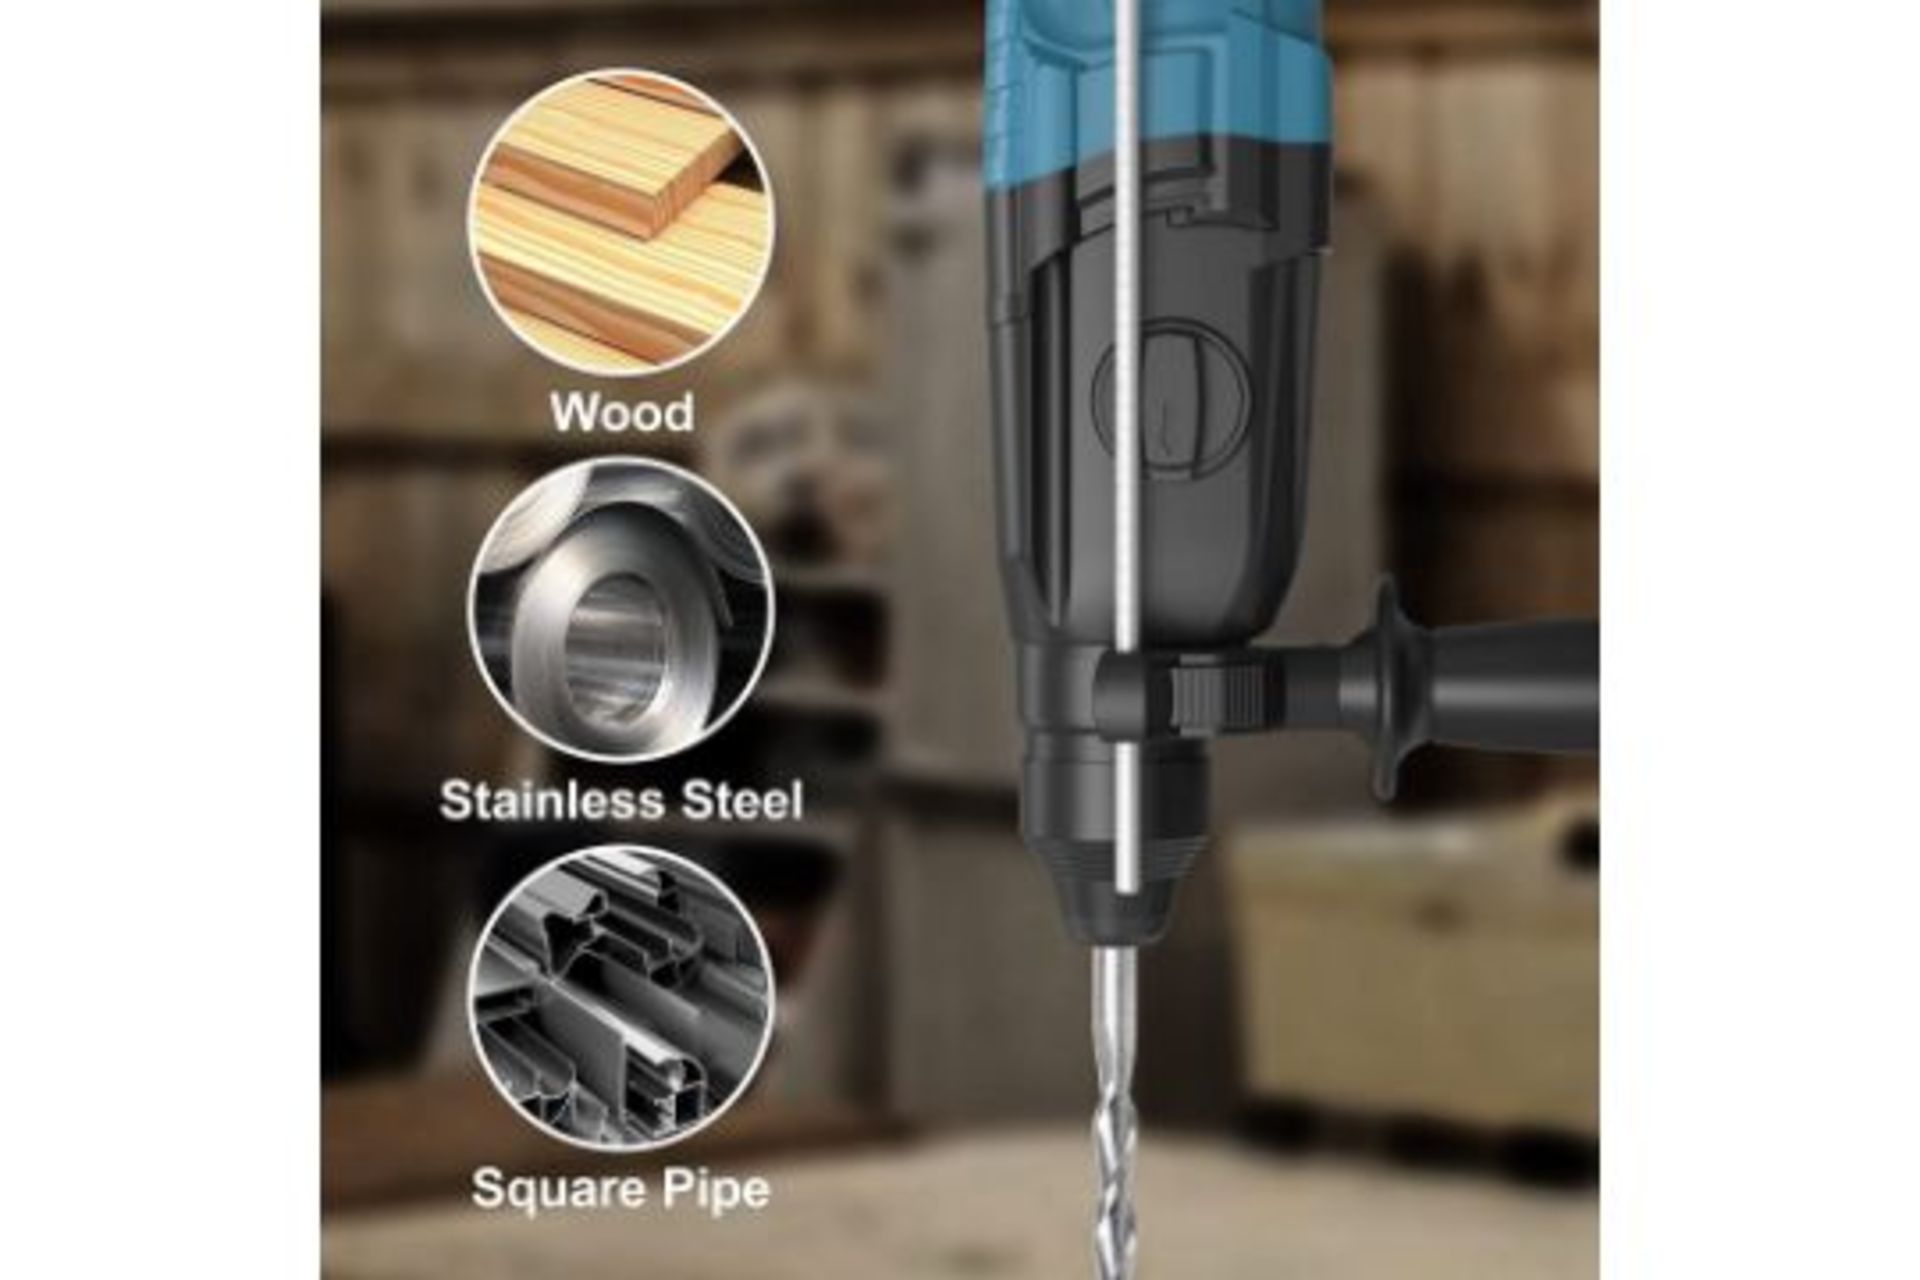 2 x NEW BOXED WESCO 800W SDS Plus Rotary Hammer Drill, 3 Modes in 1, 2.8J Impact Energy, Variable- - Image 2 of 3